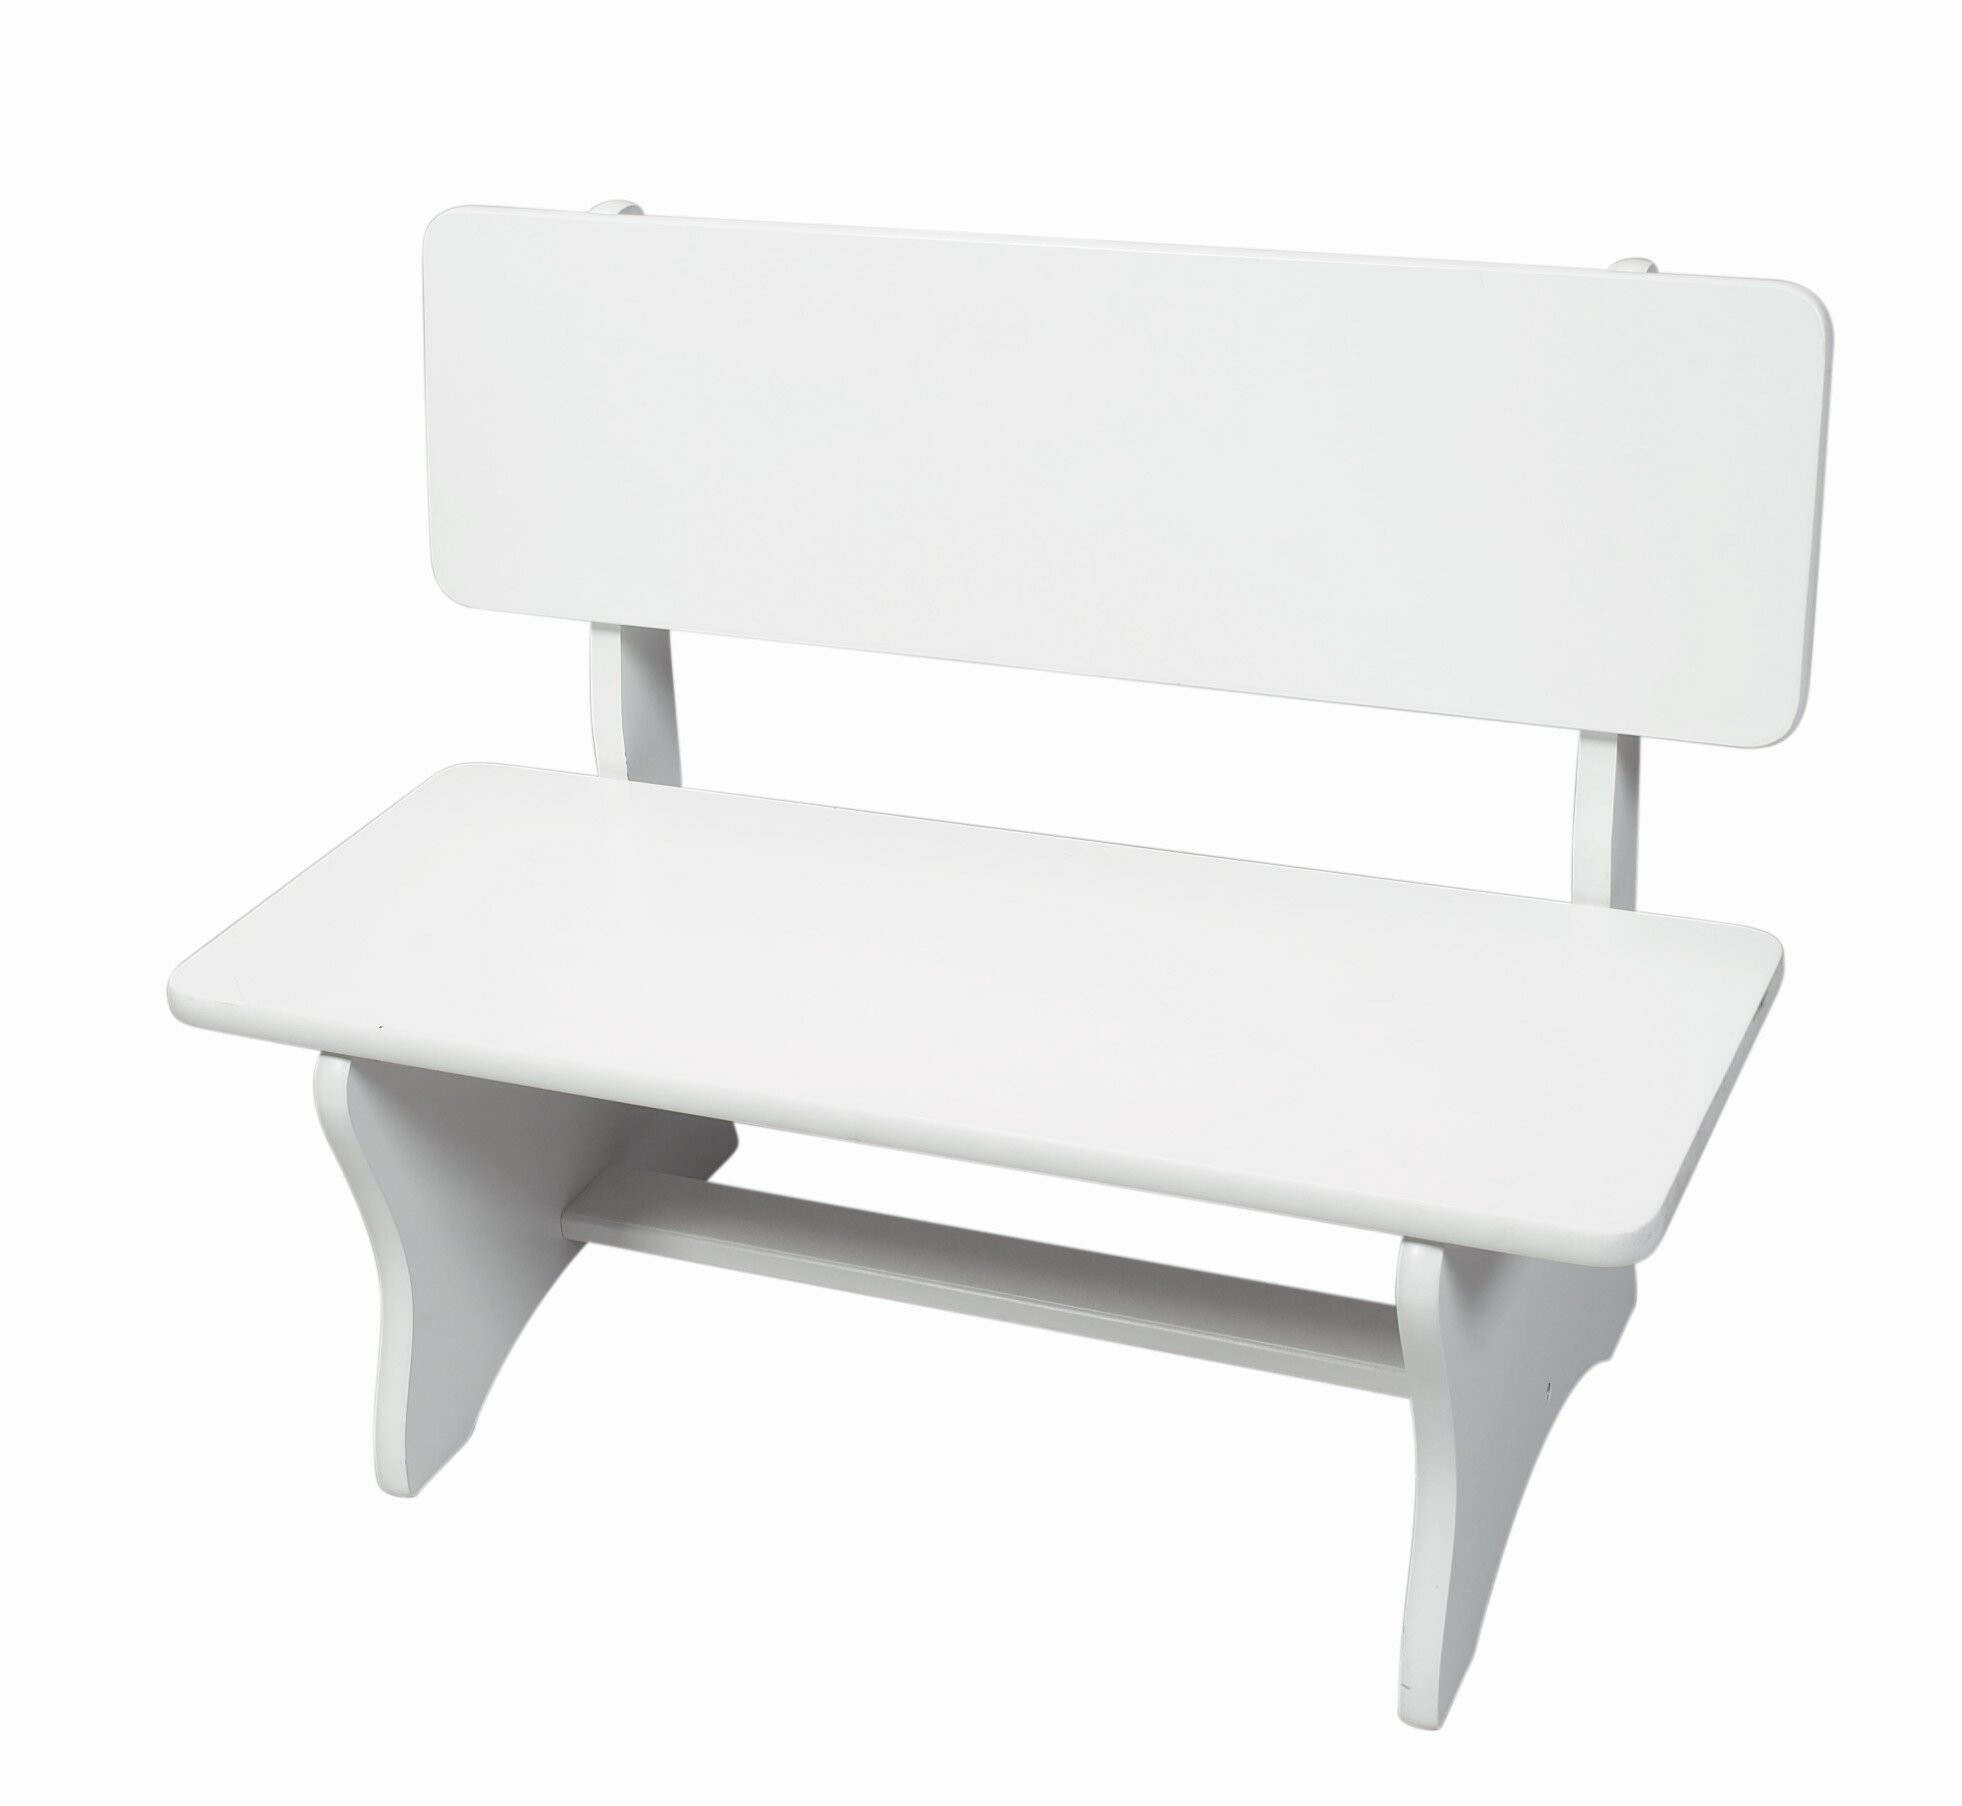 Bench for your childs playroom or bedroom this solid wooden